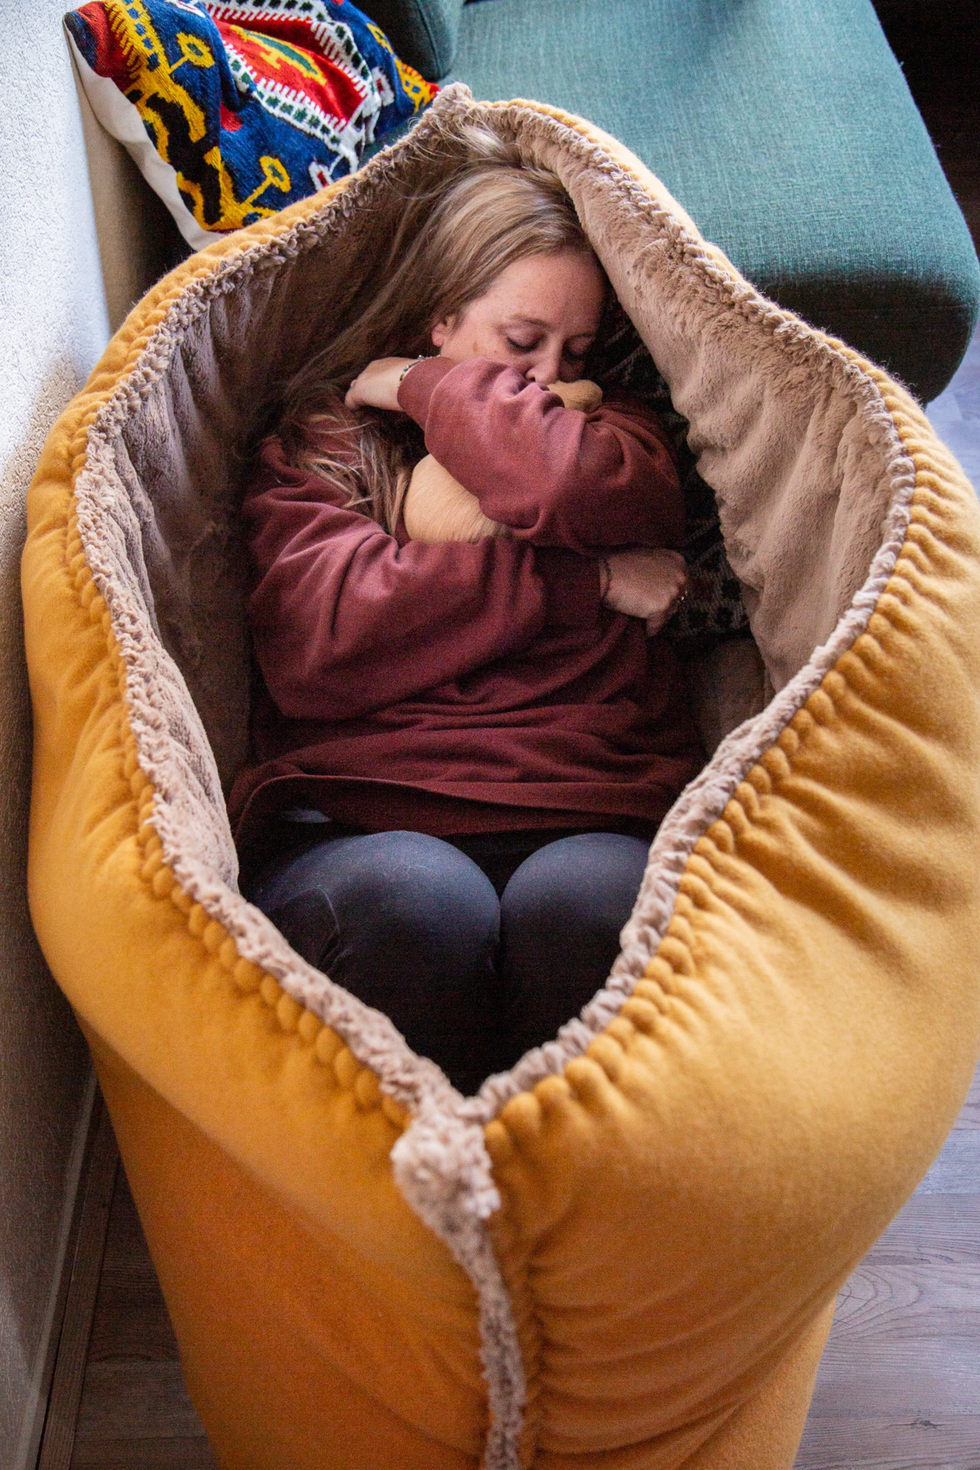 The Floof is a Giant Pouch Nap Spot That Gives You Your Own Personal Cocoon